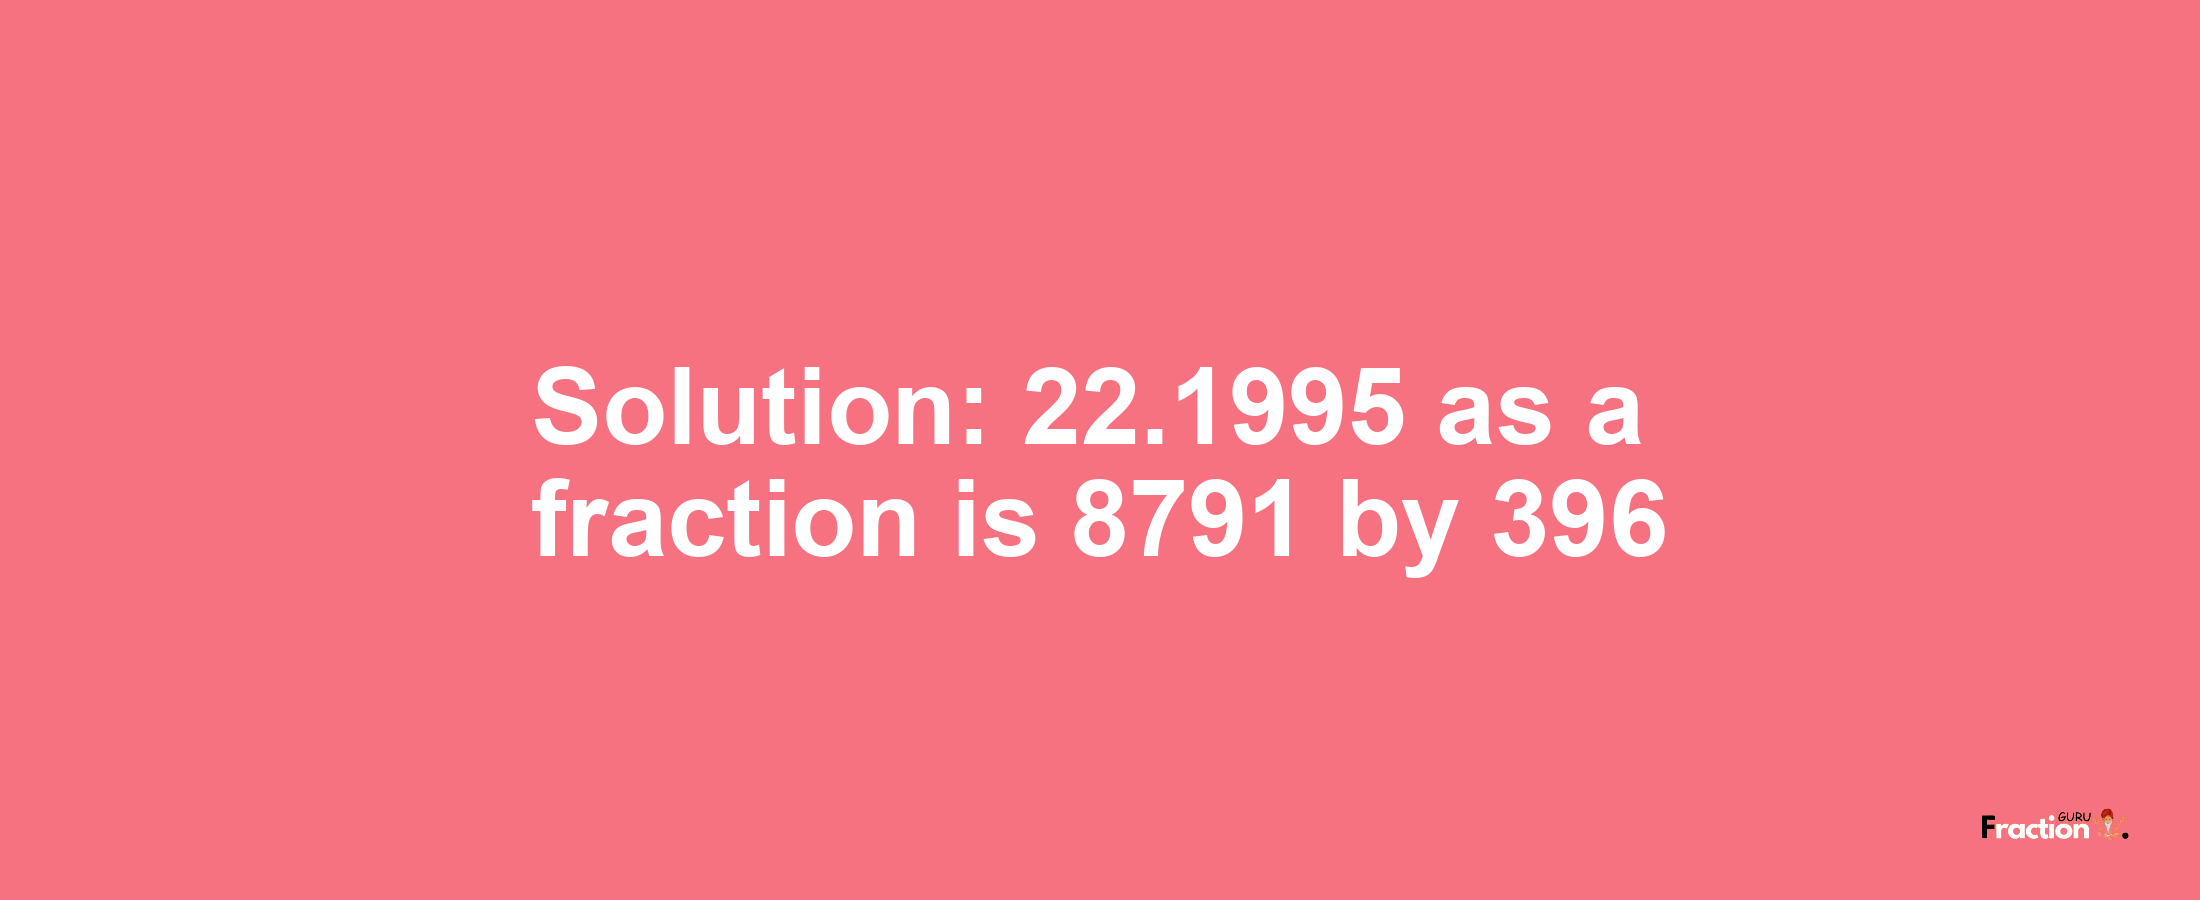 Solution:22.1995 as a fraction is 8791/396